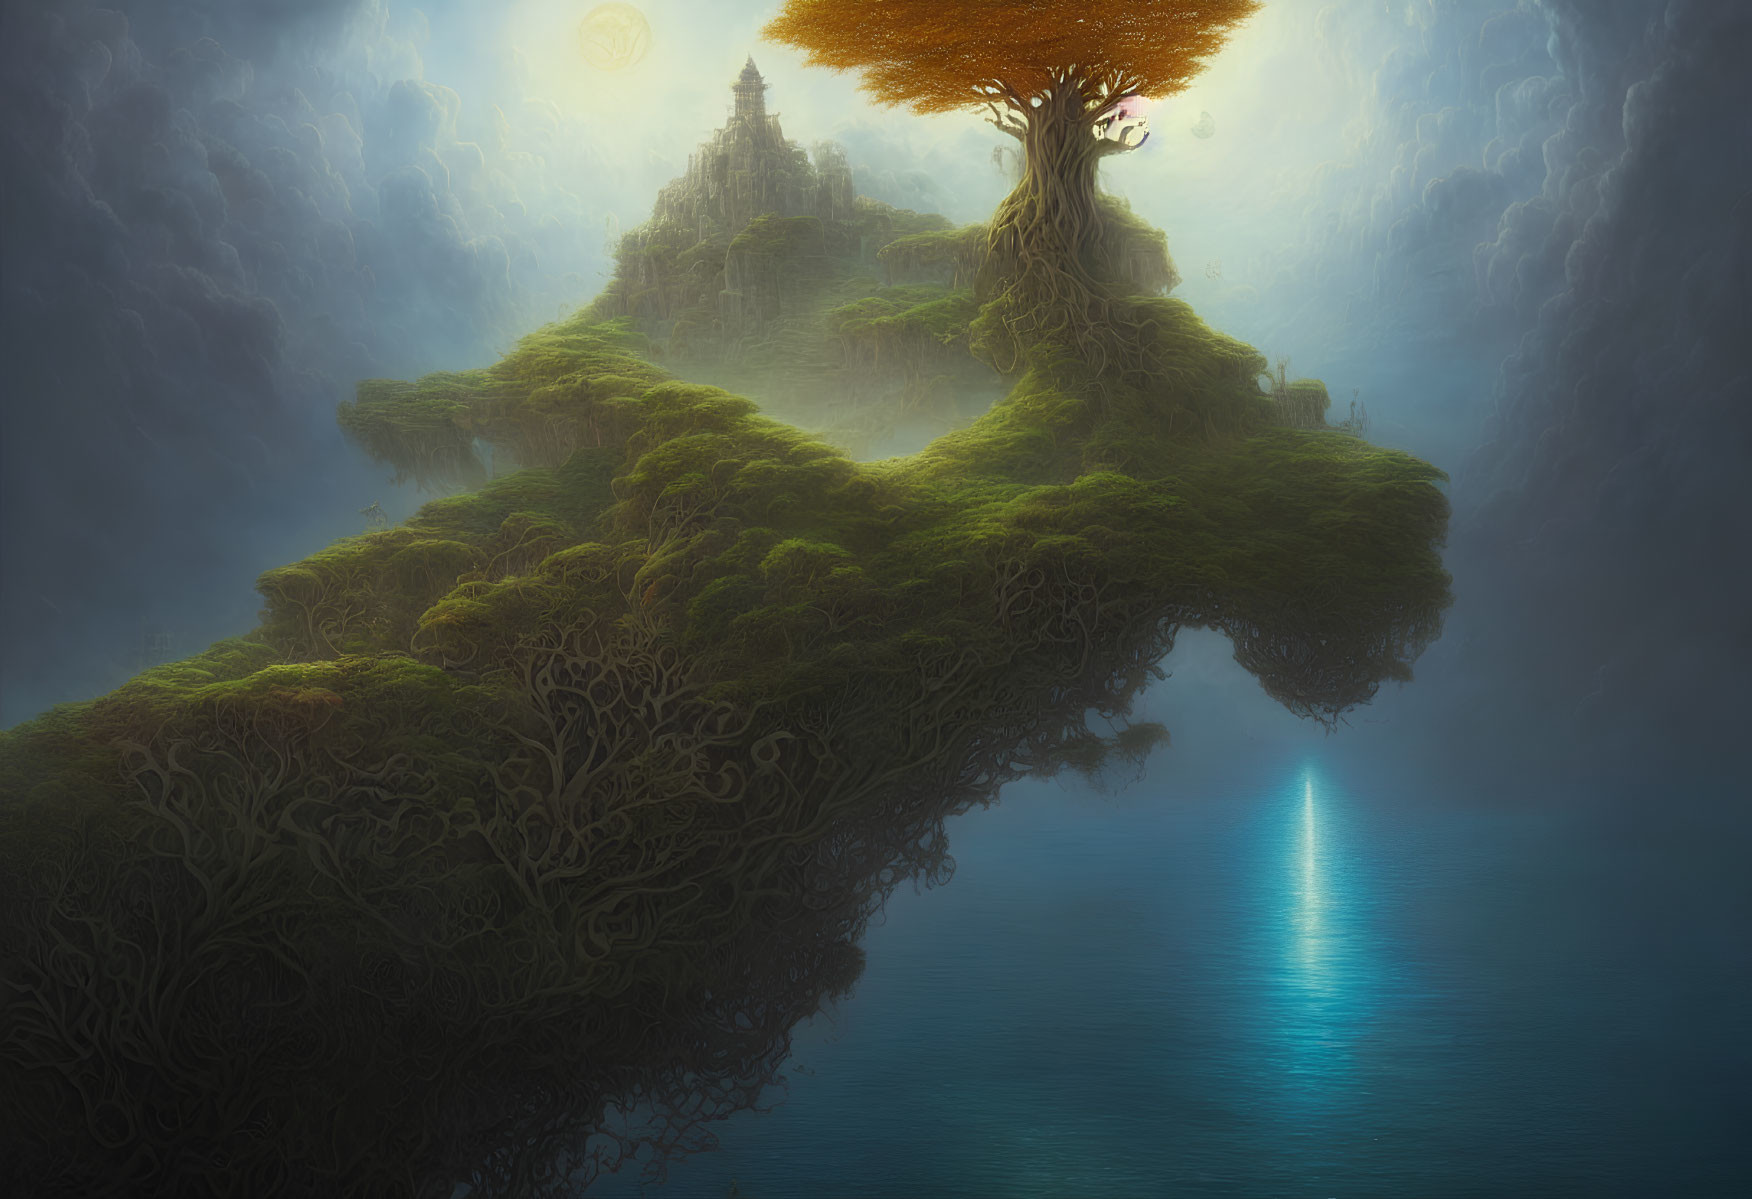 Lush greenery, ancient temple, fiery tree on floating island